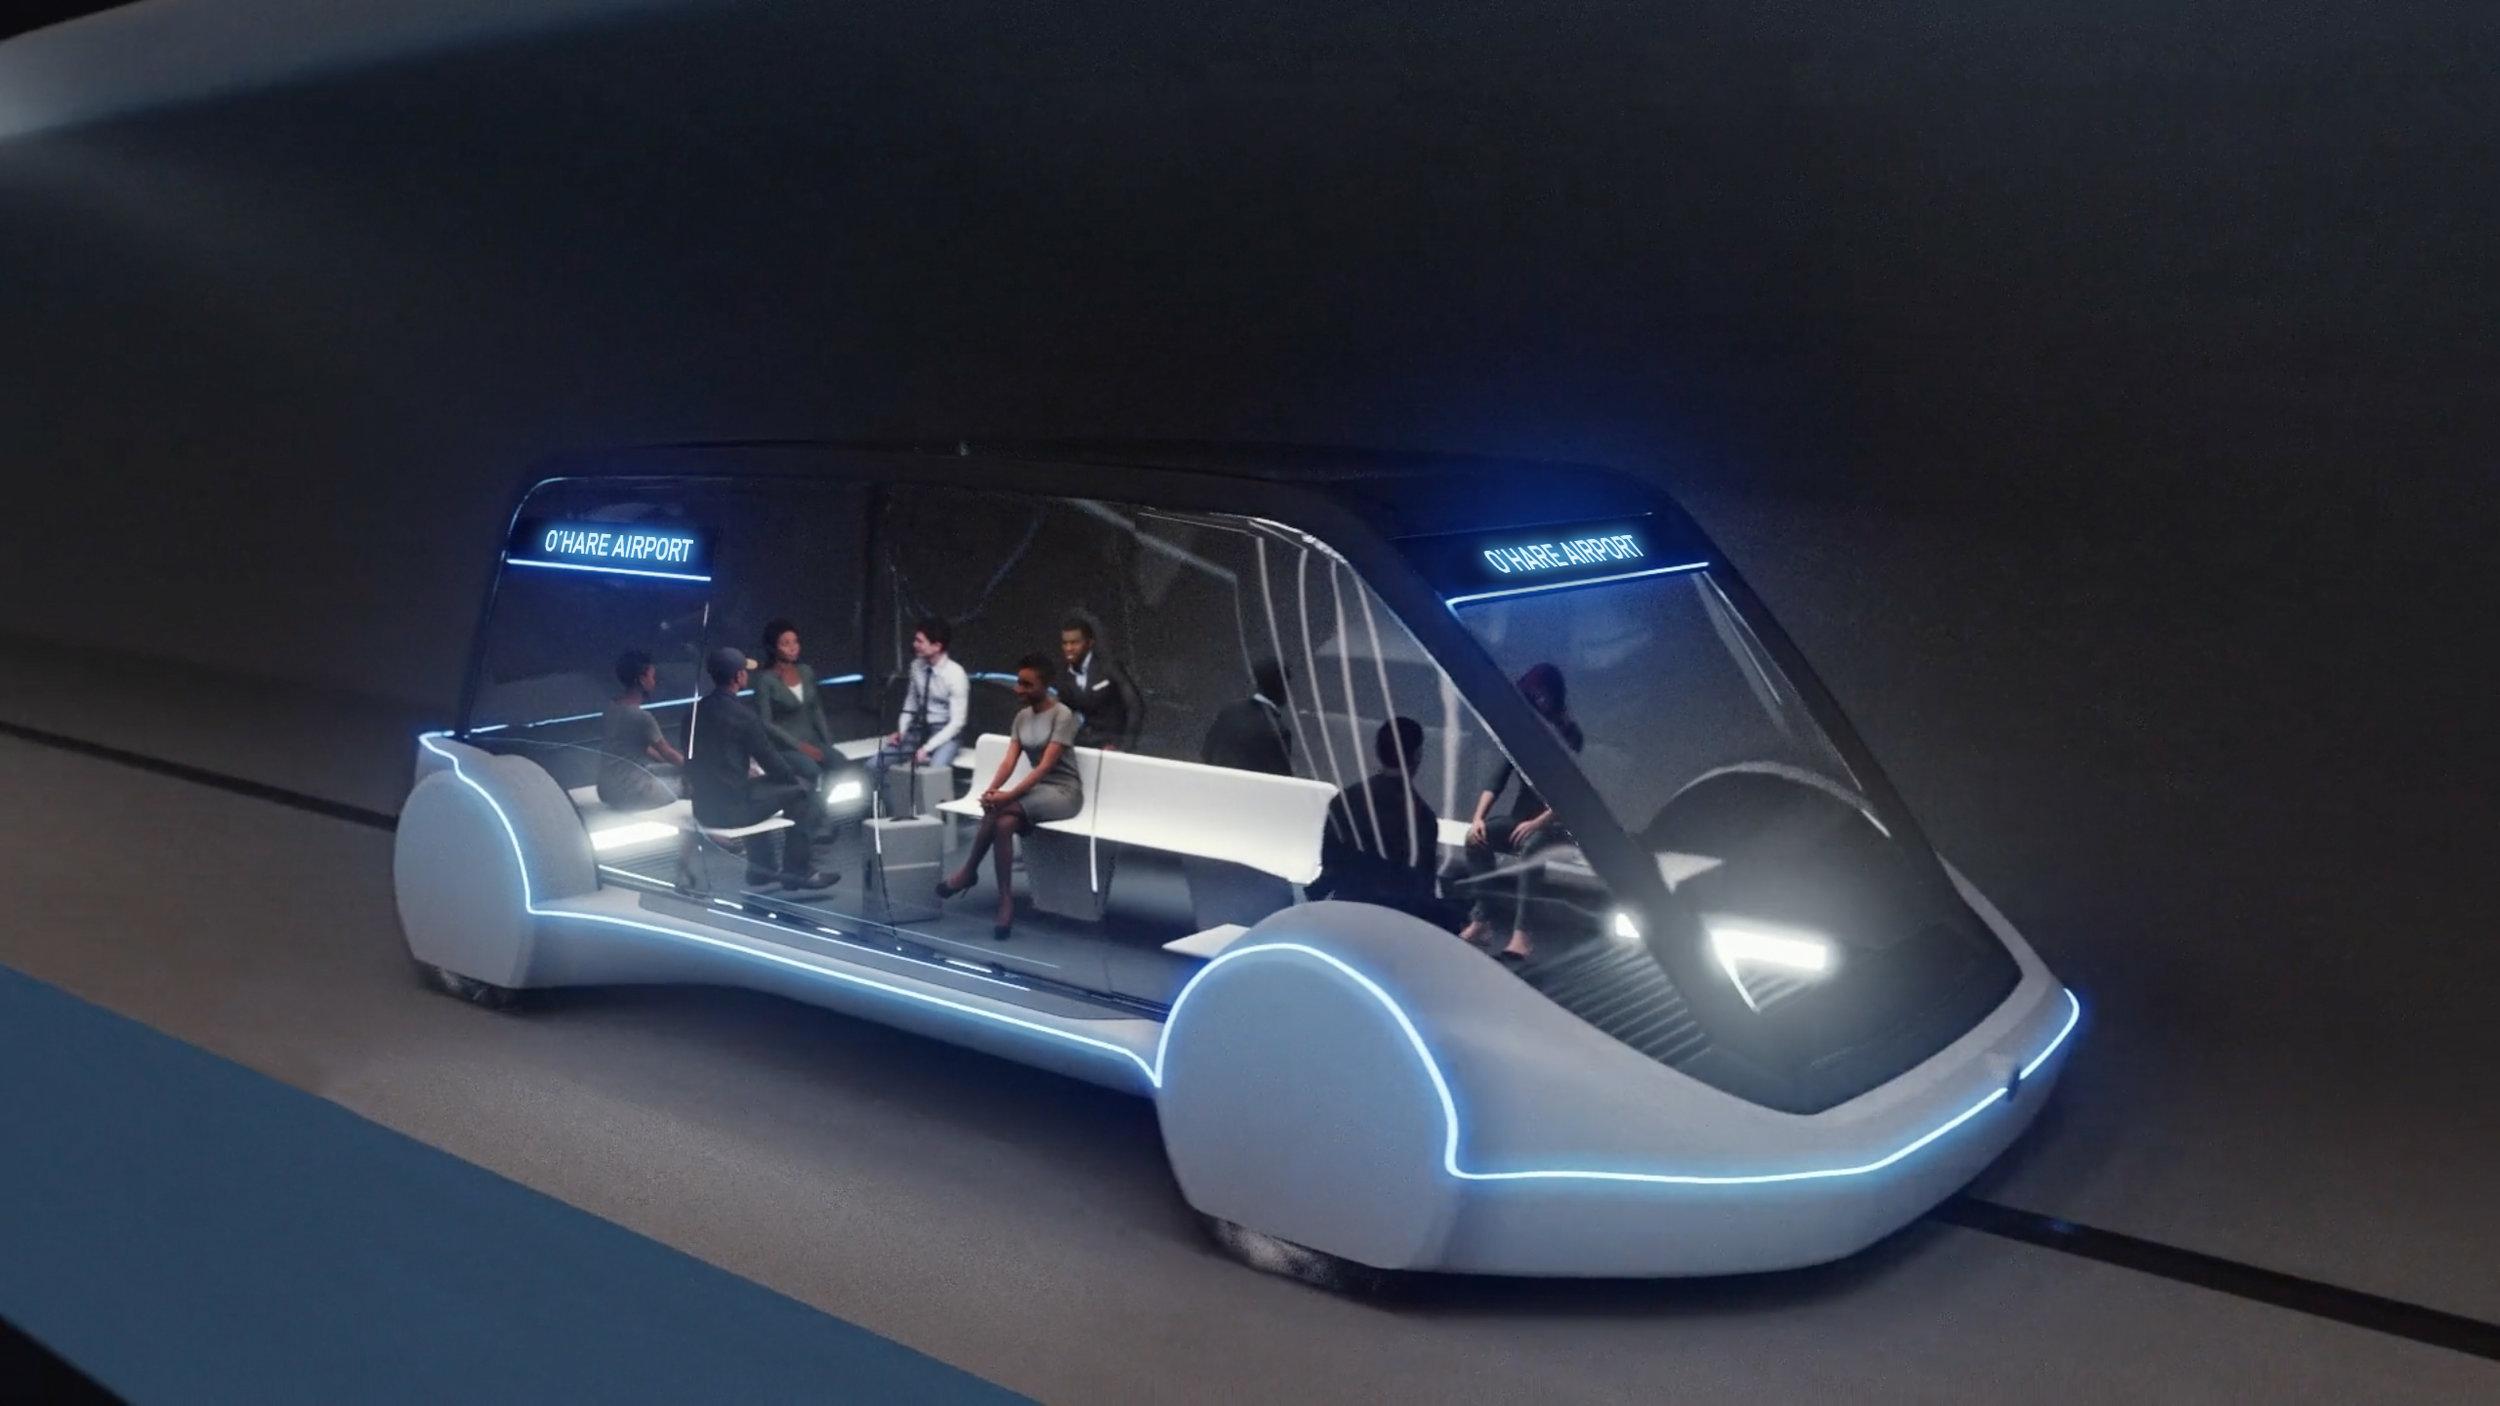 Elon Musk’s proposal calls for an underground system that transports travelers on pods at speeds of 125-150 mph. (Credit: The Boring Company)